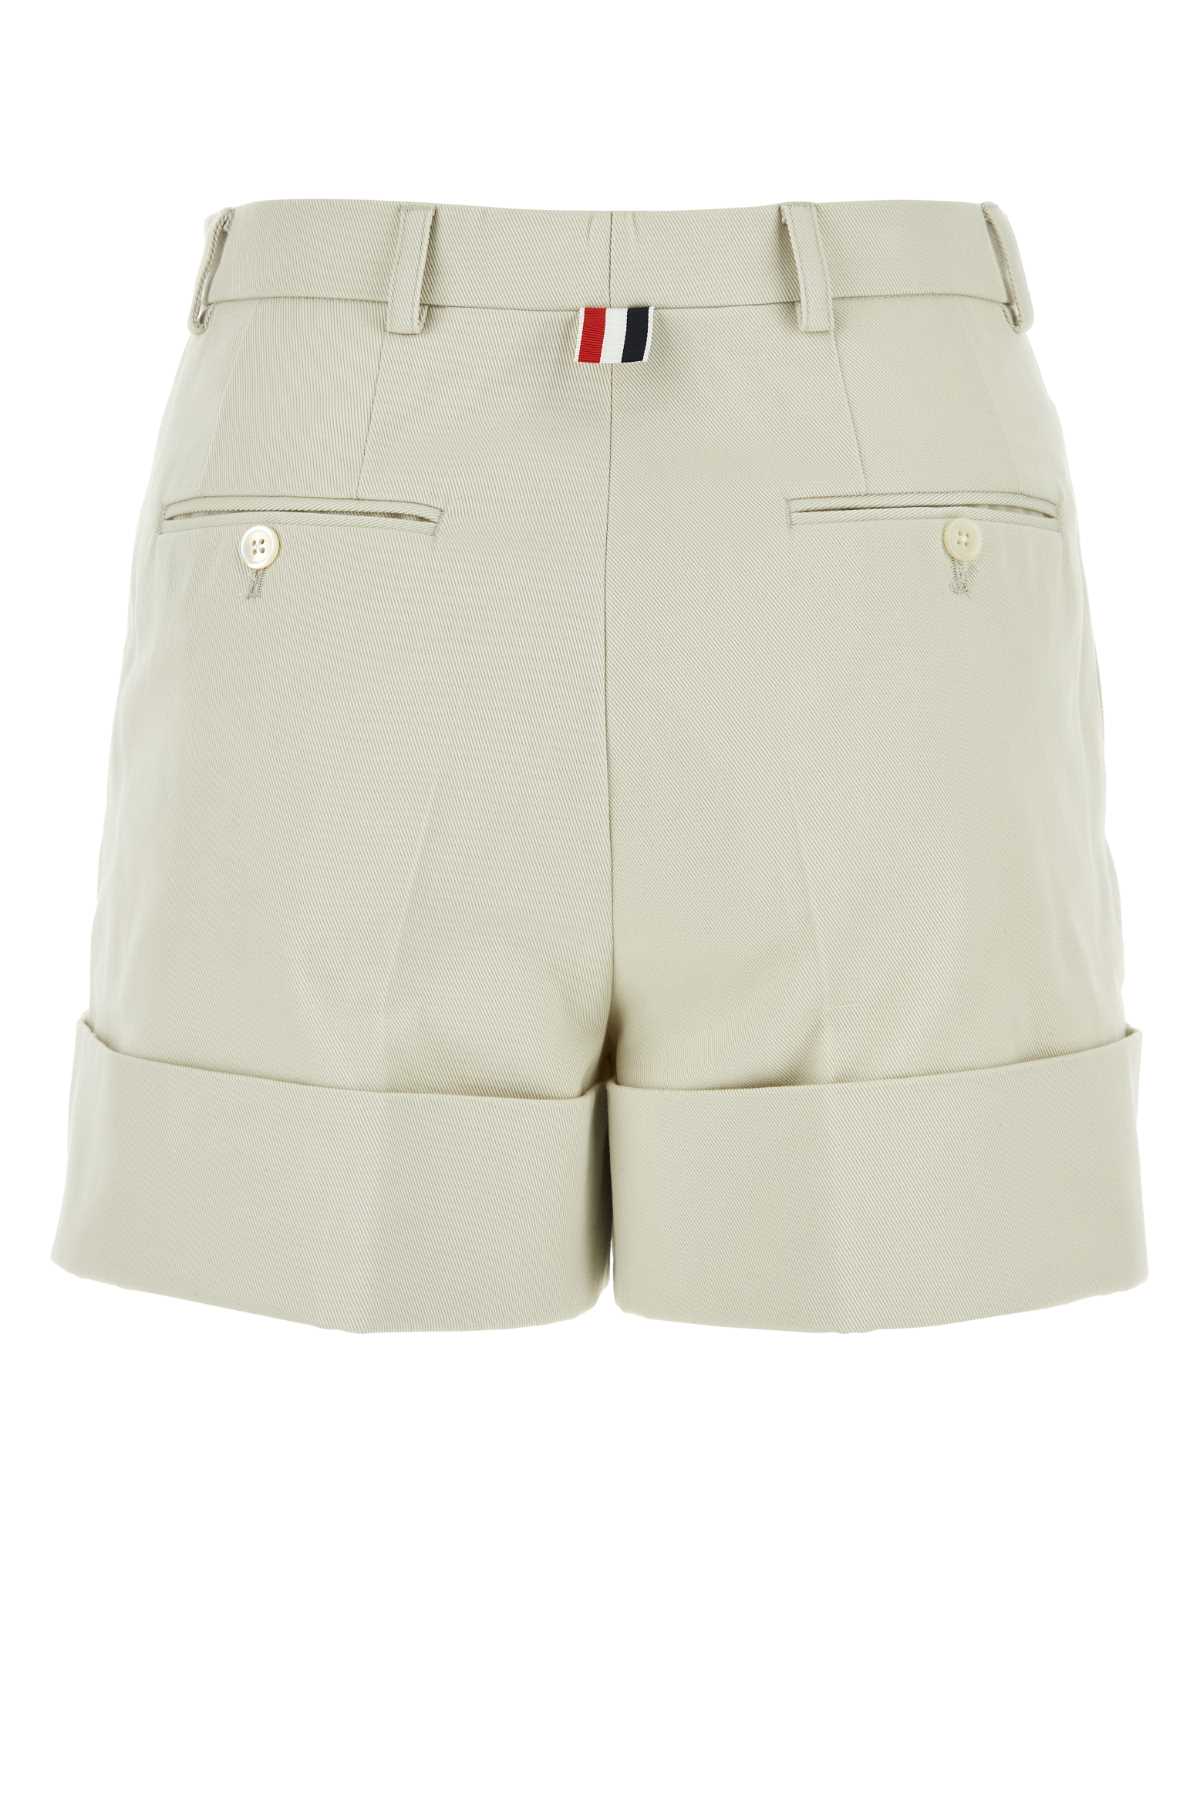 Thom Browne Sand Cotton Shorts In Naturalwhite